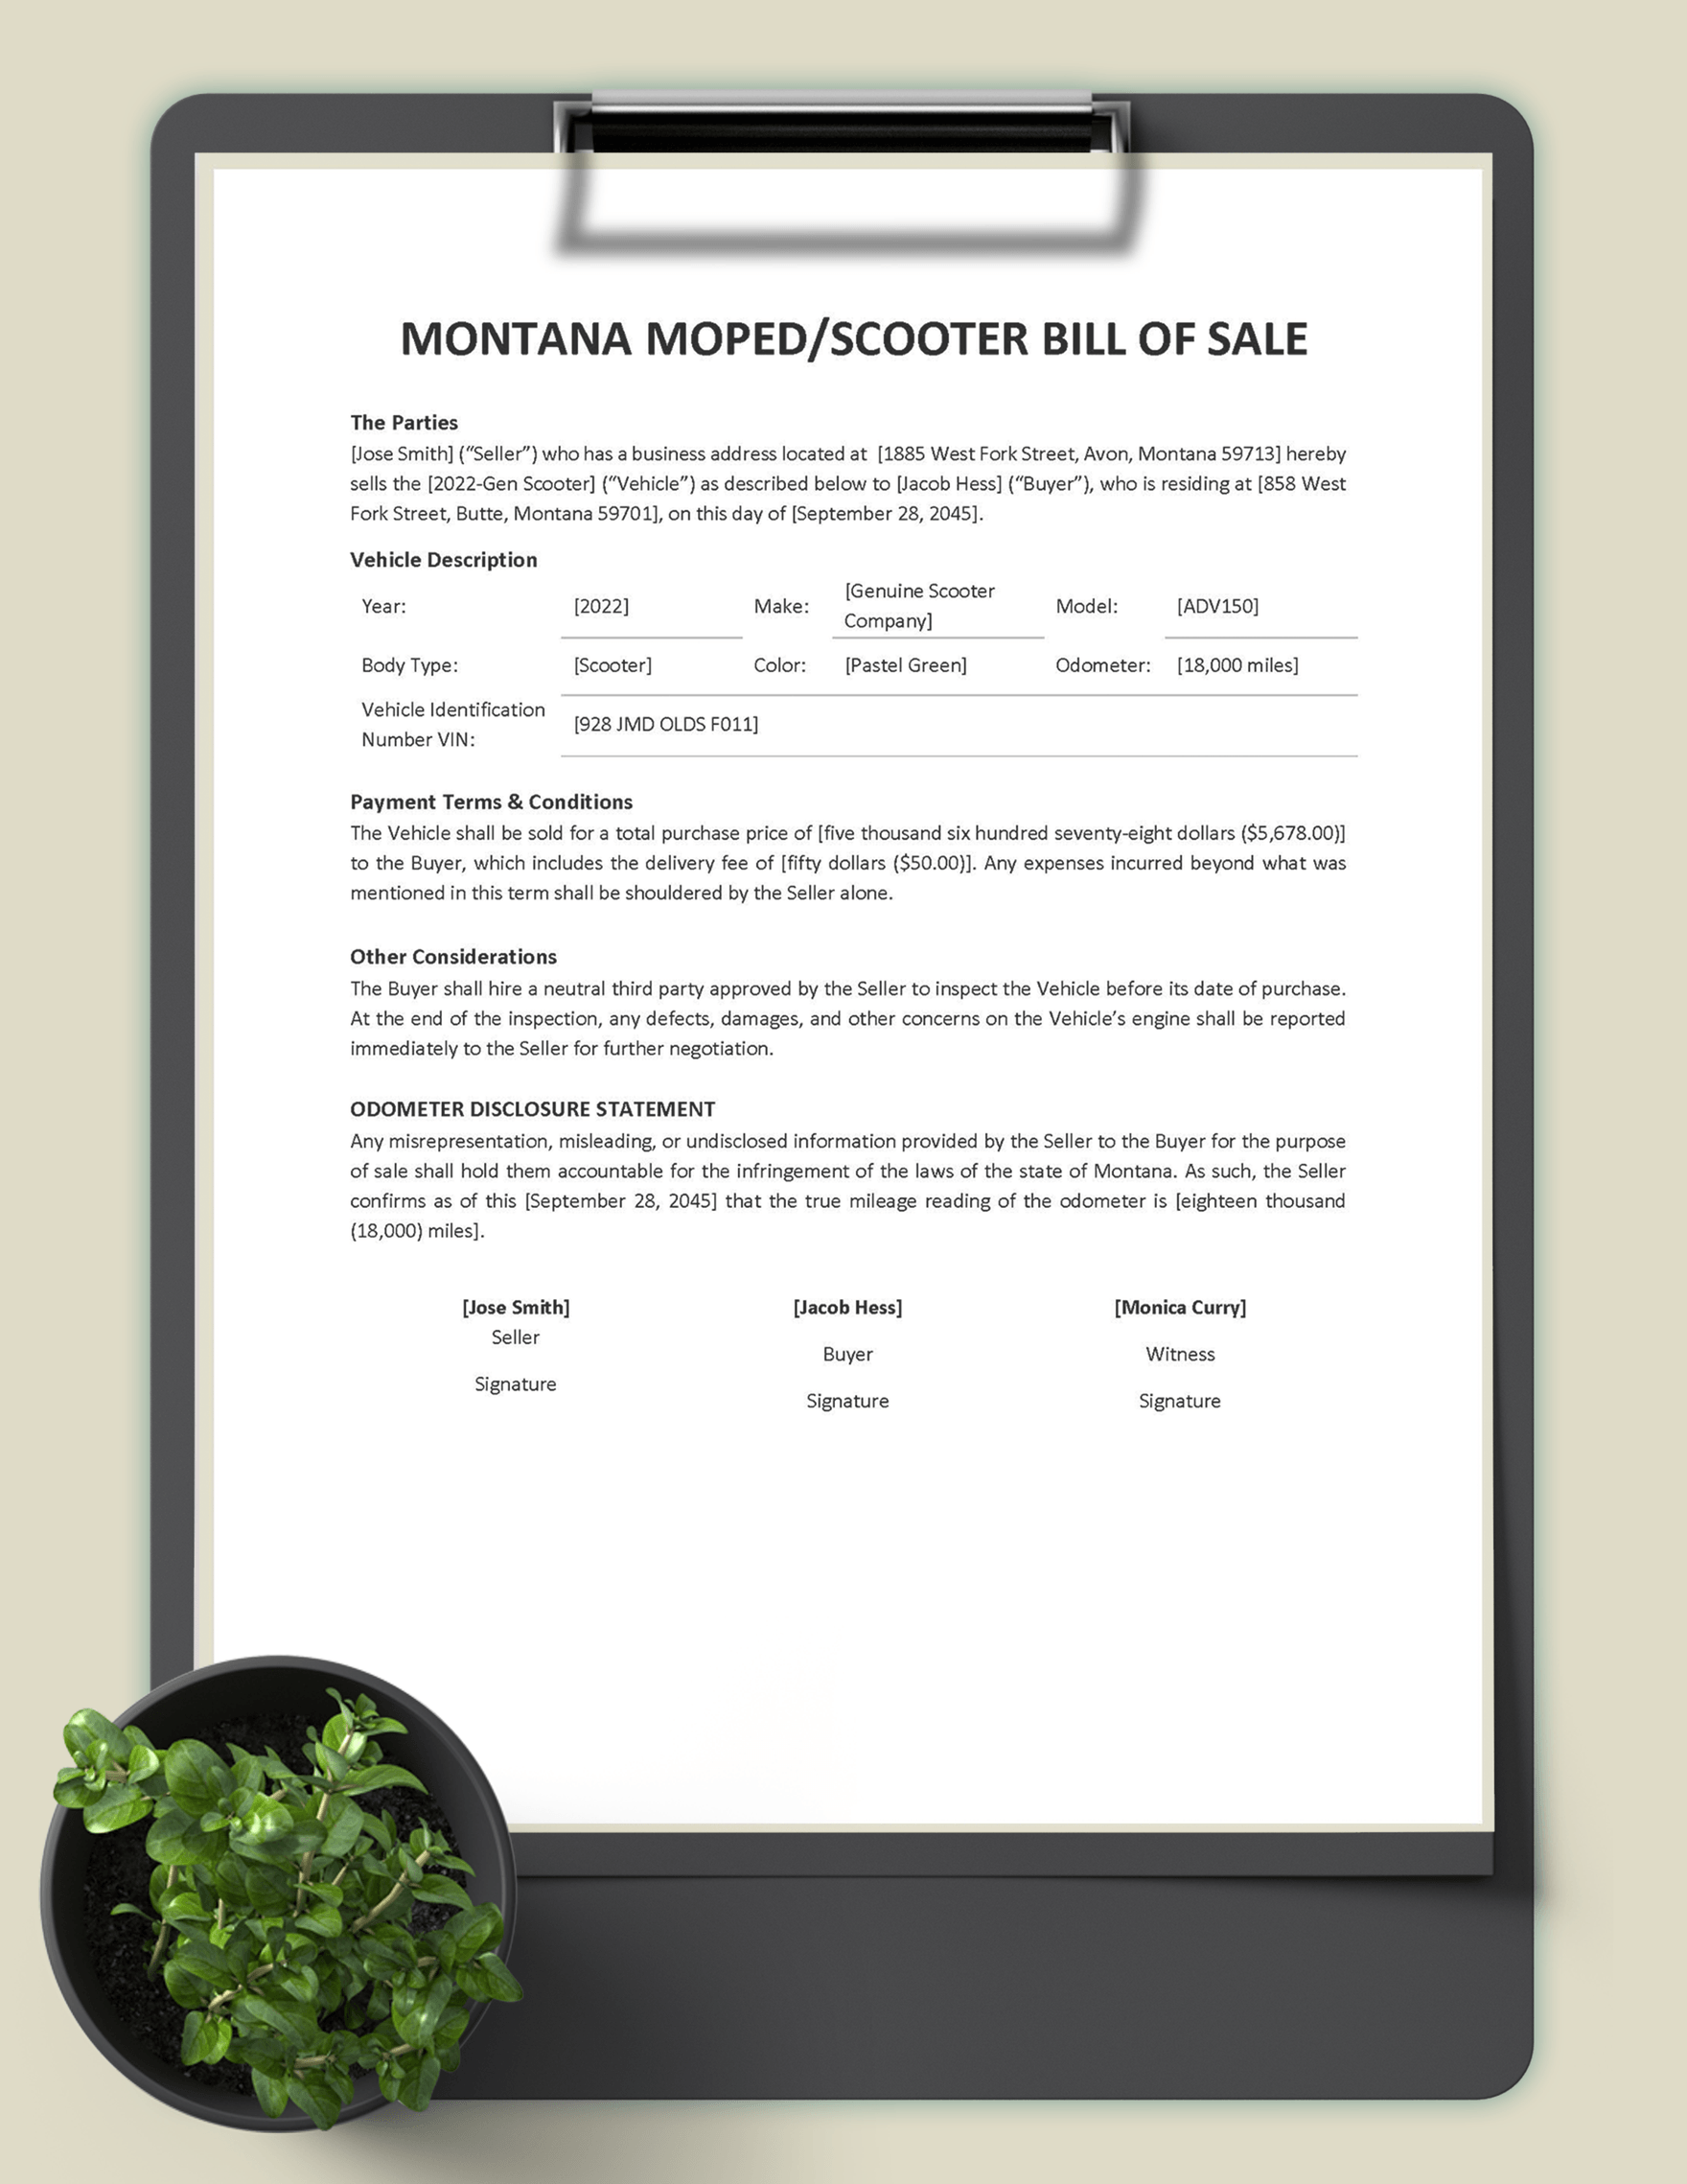 Montana Moped / Scooter Bill of Sale Template